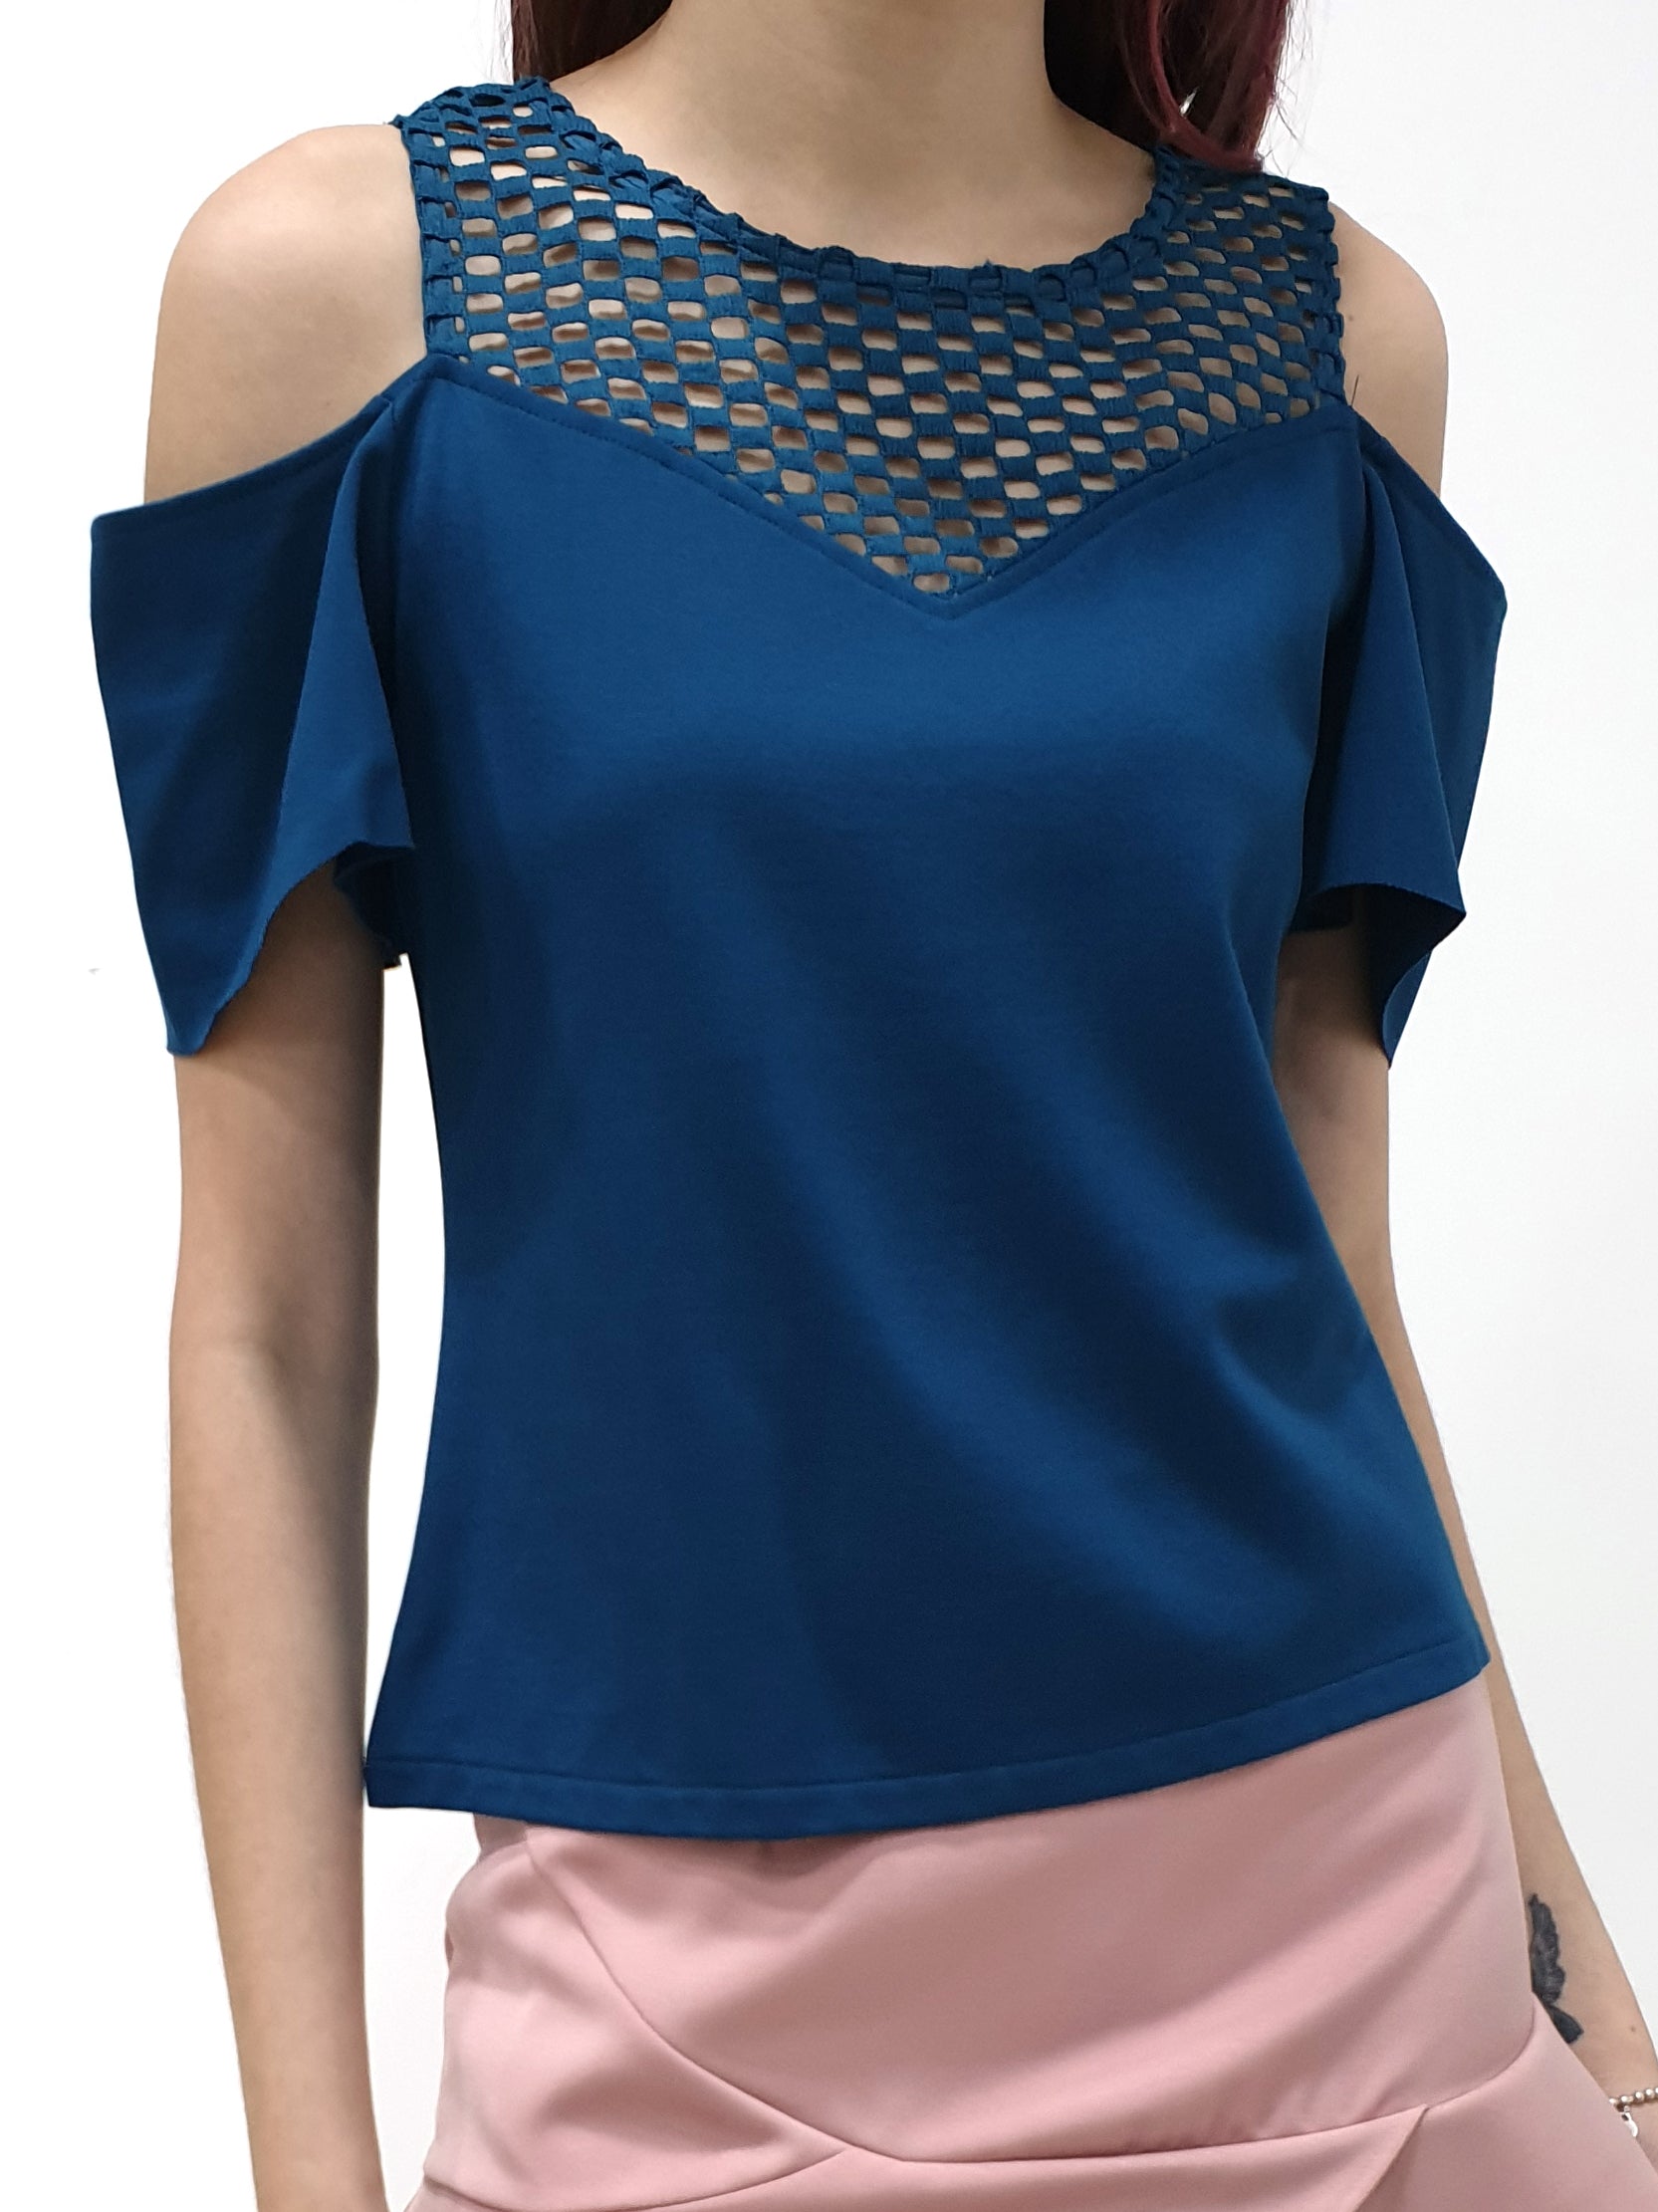 See Through Cold Shoulder Top (Non-returnable) - Ferlicious